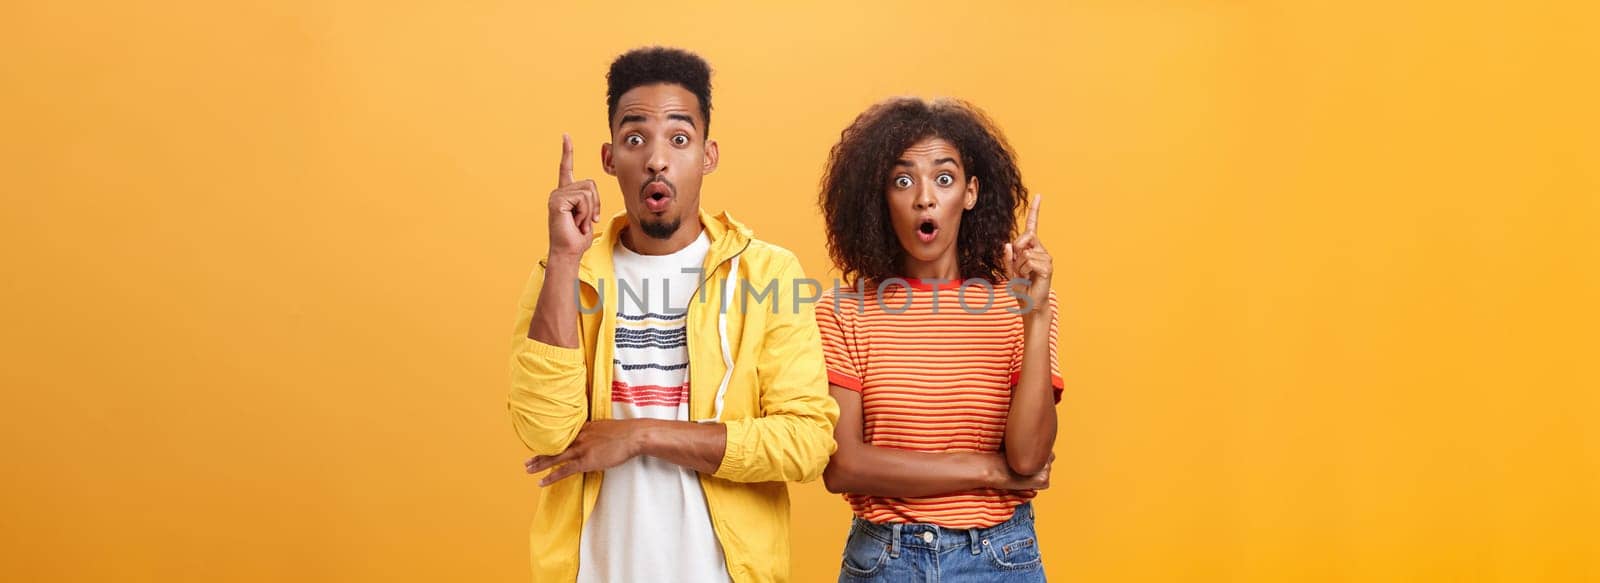 The both got perfect idea at same time. Amazed and excited creative charismatic african american man and woman raising index fingers in eureka gesture opening mouth while adding suggestions. Copy space